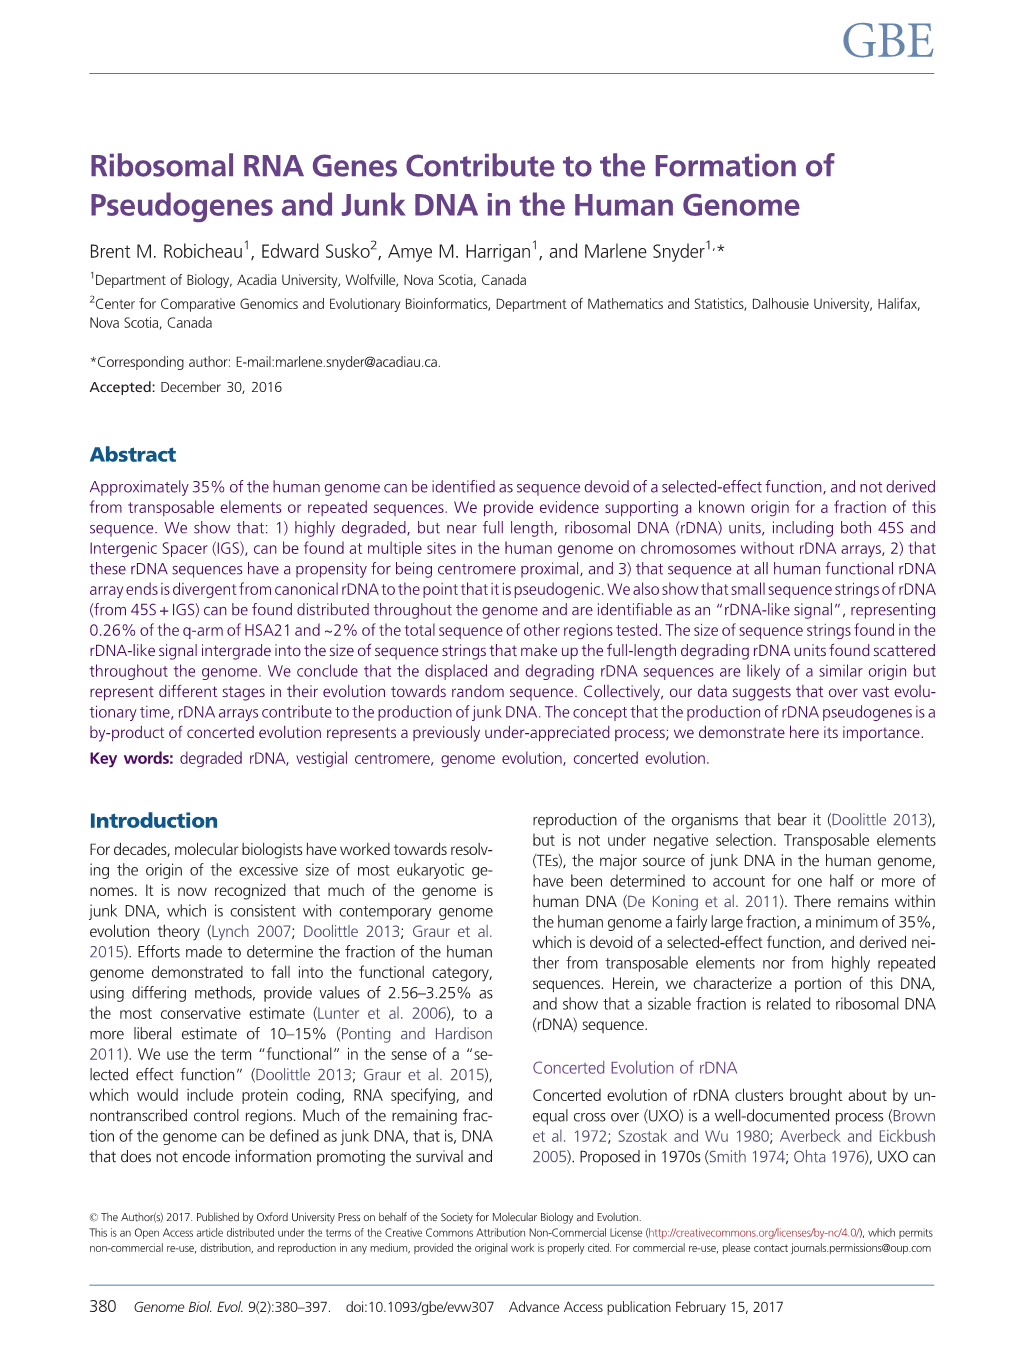 Ribosomal RNA Genes Contribute to the Formation of Pseudogenes and Junk DNA in the Human Genome